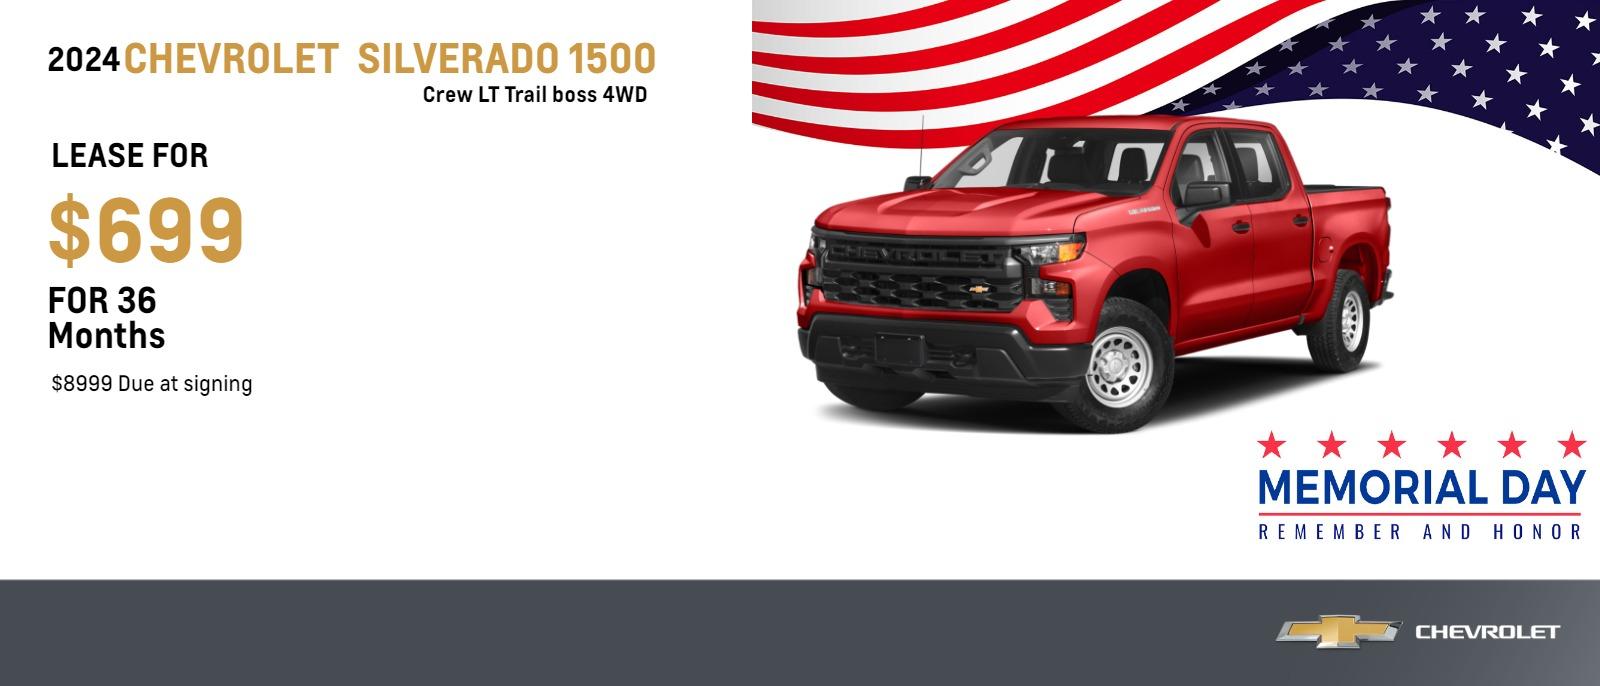 2024 Chevrolet Silverado 1500 Crew LT Trail boss 4WD
$699 Month Lease | 36 Months | $8999 Due at signing